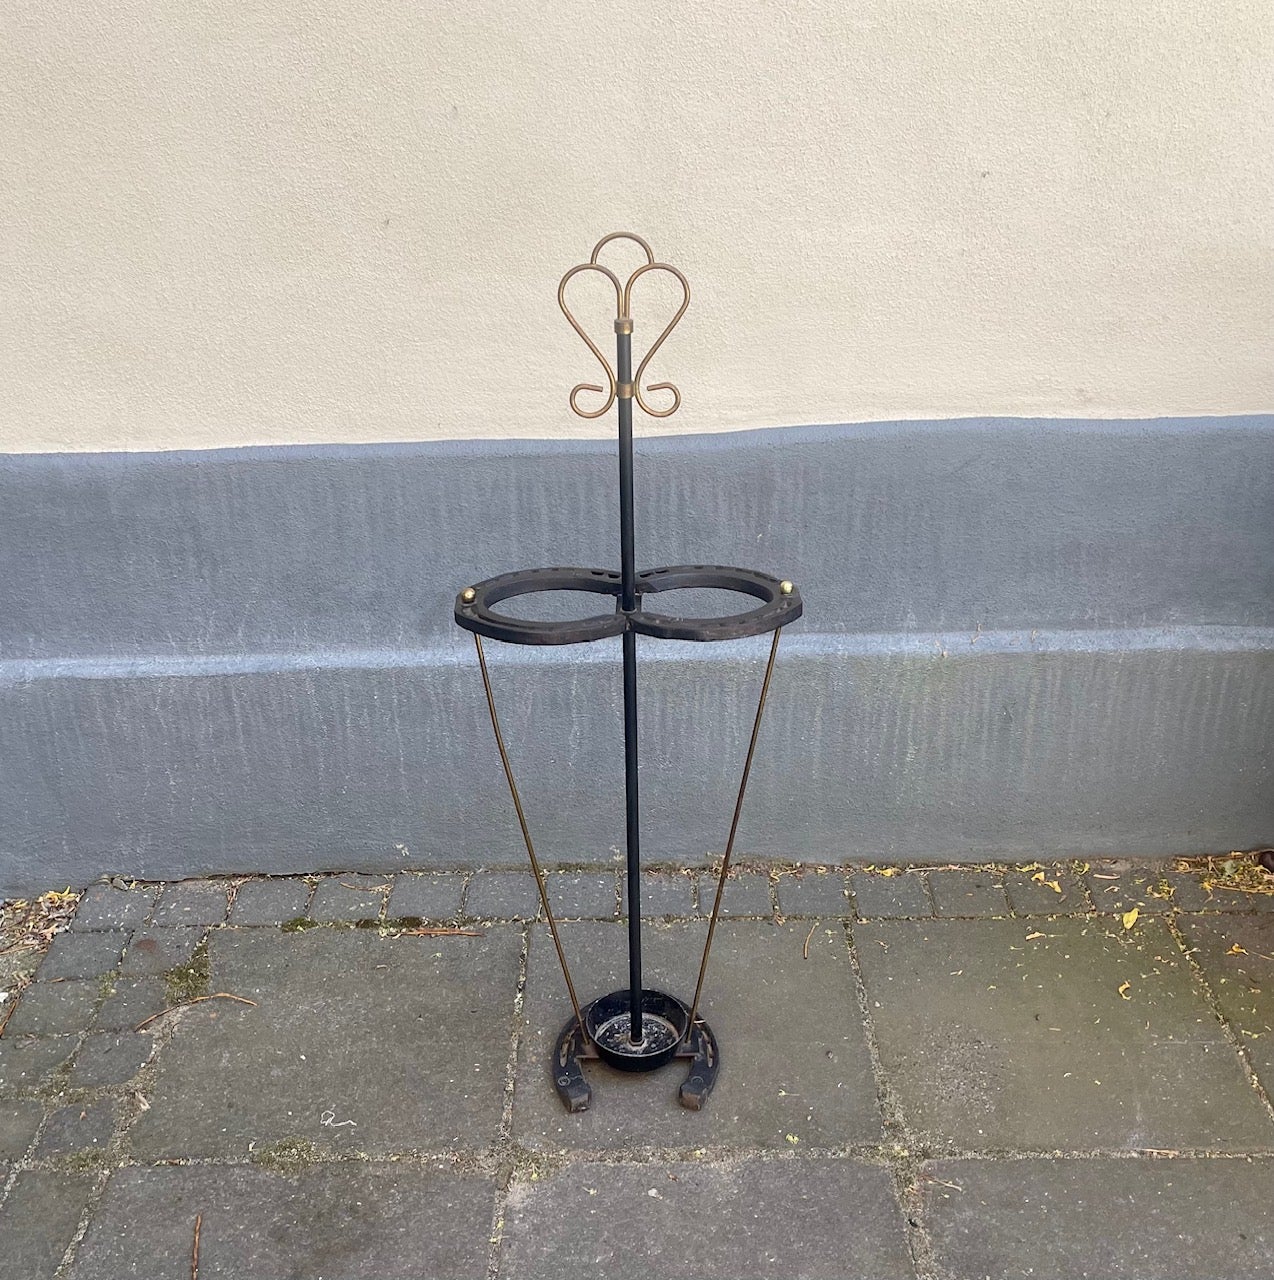 Equestrian themed umbrella stand made from 3 black horseshoes, brass string sides, a small aluminium base and topped with a brass ornament. This piece in original condition dates from the 1930s and it was made in Denmark. Measurements: H: 90 cm, W: